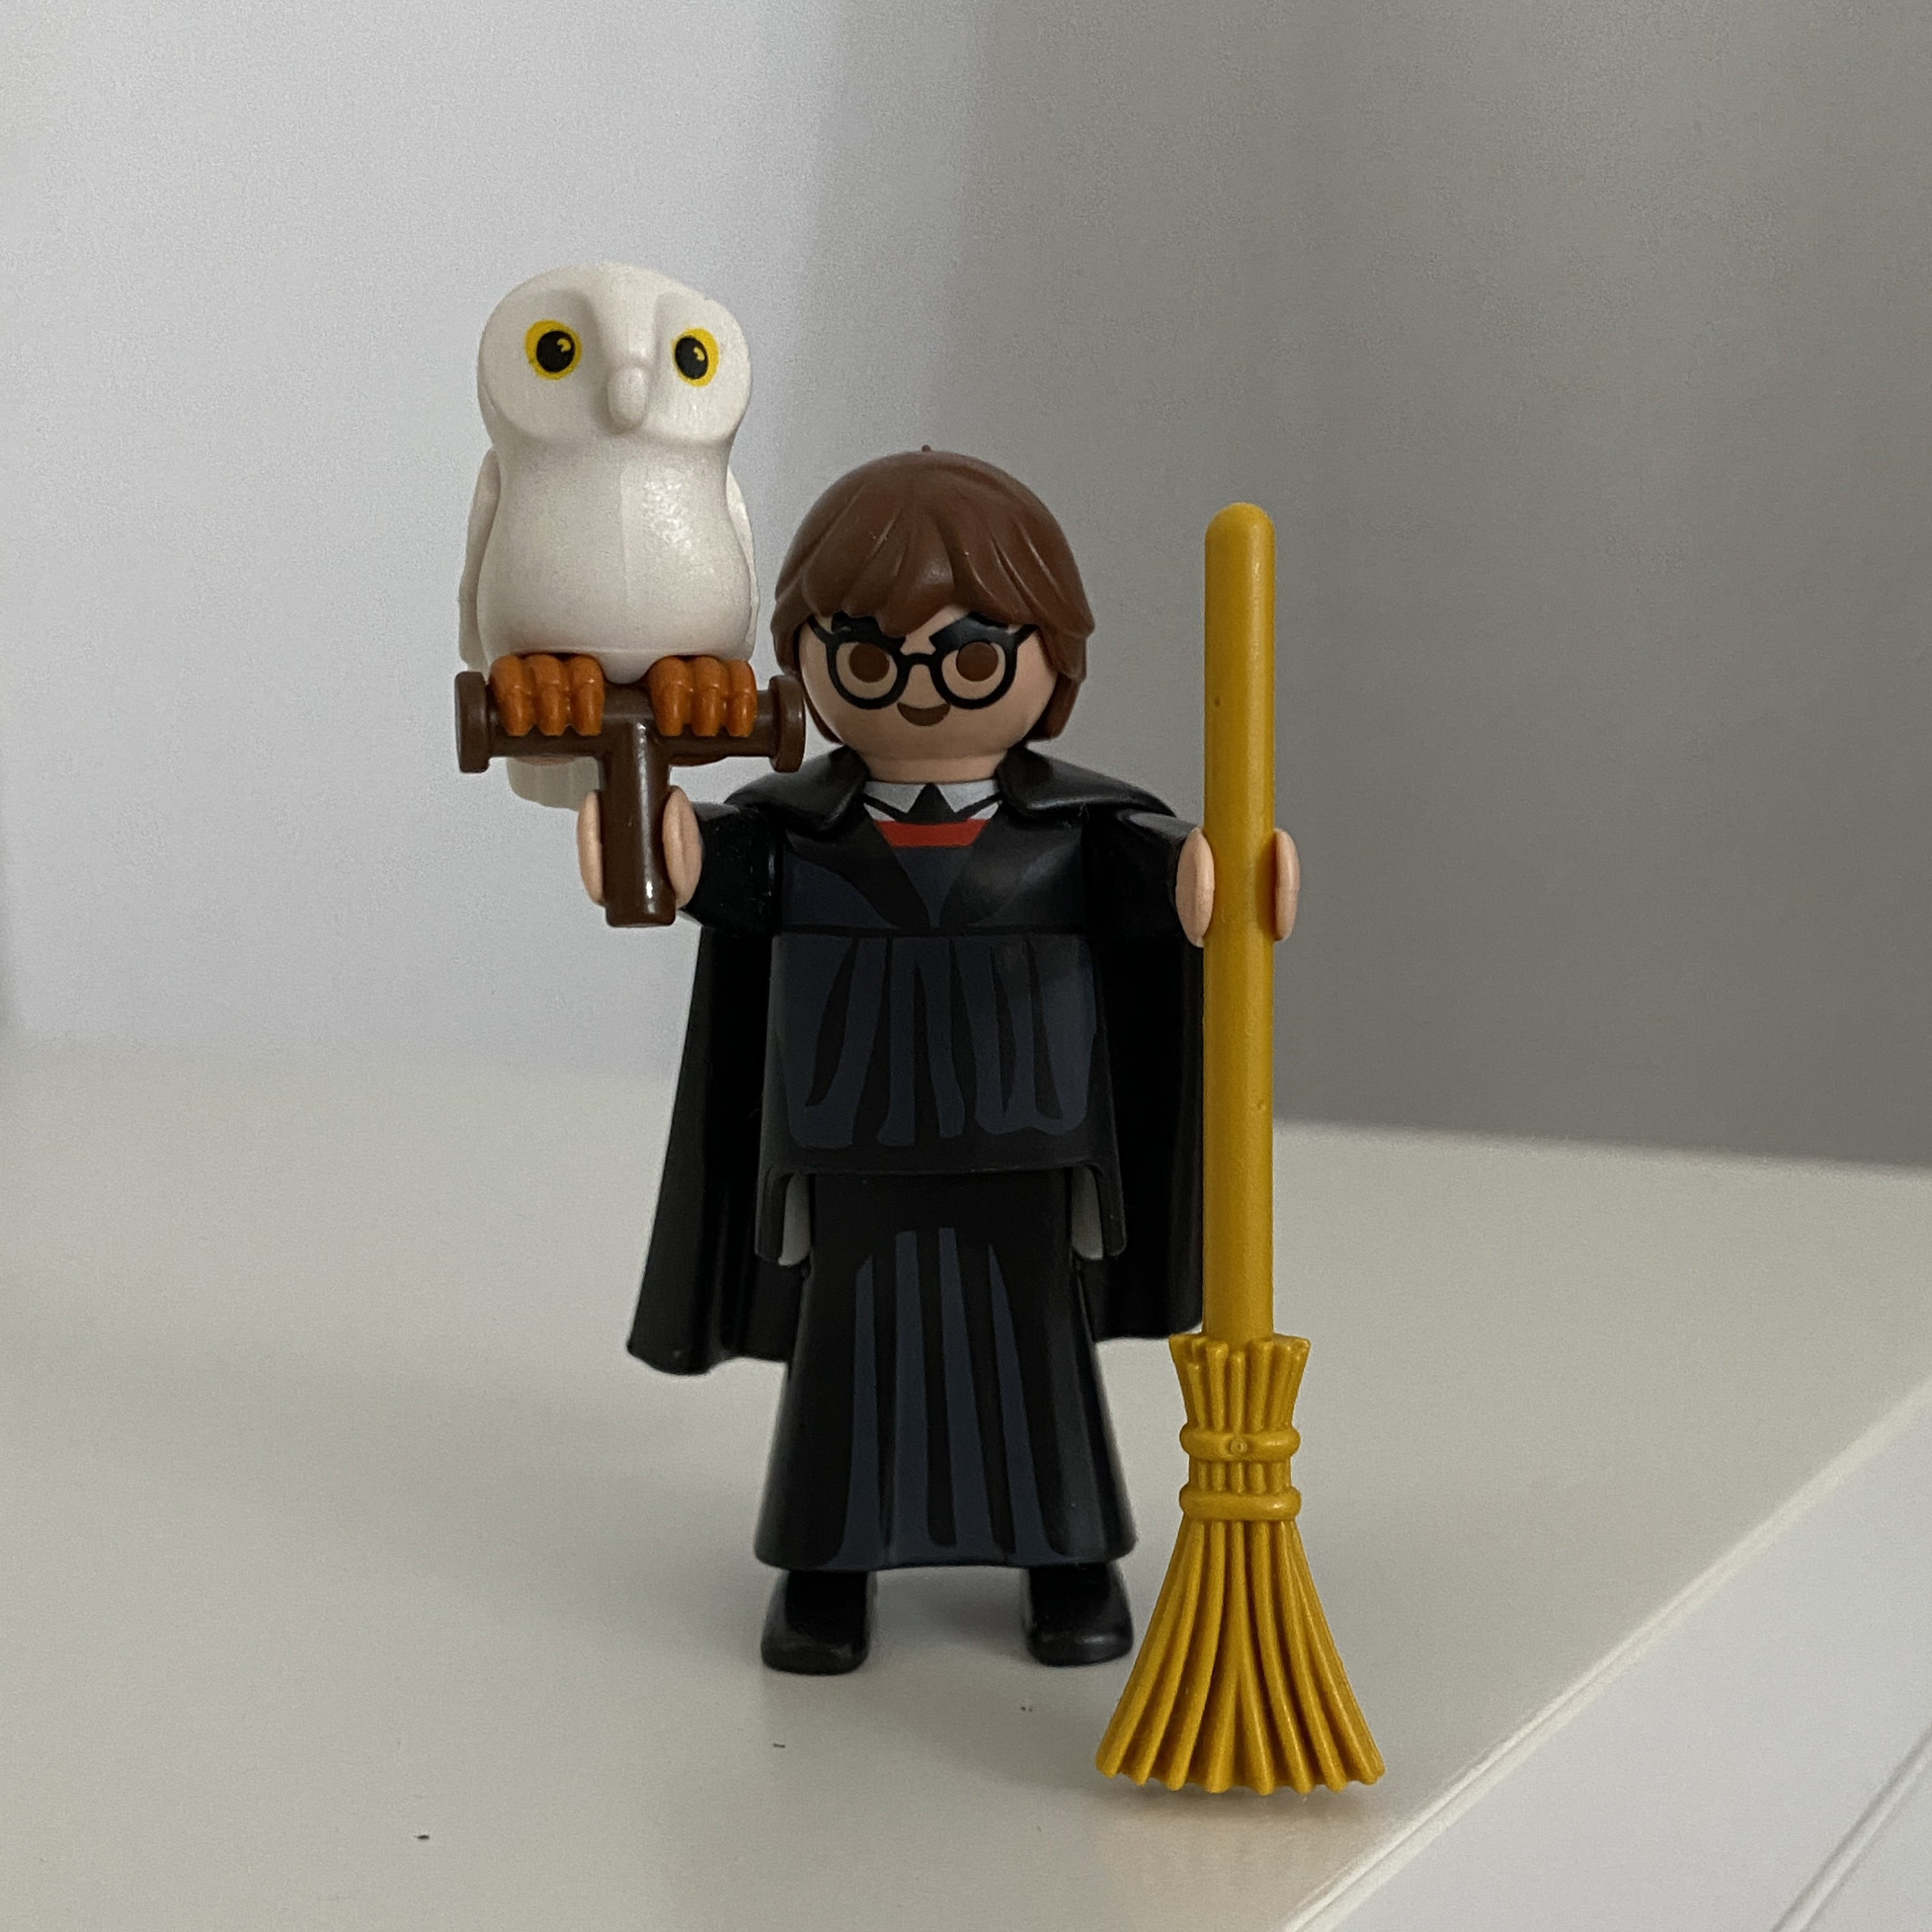 Harry Potter Playmobil Customized Figure Playmobil Personalized Character  Collectionism - Etsy